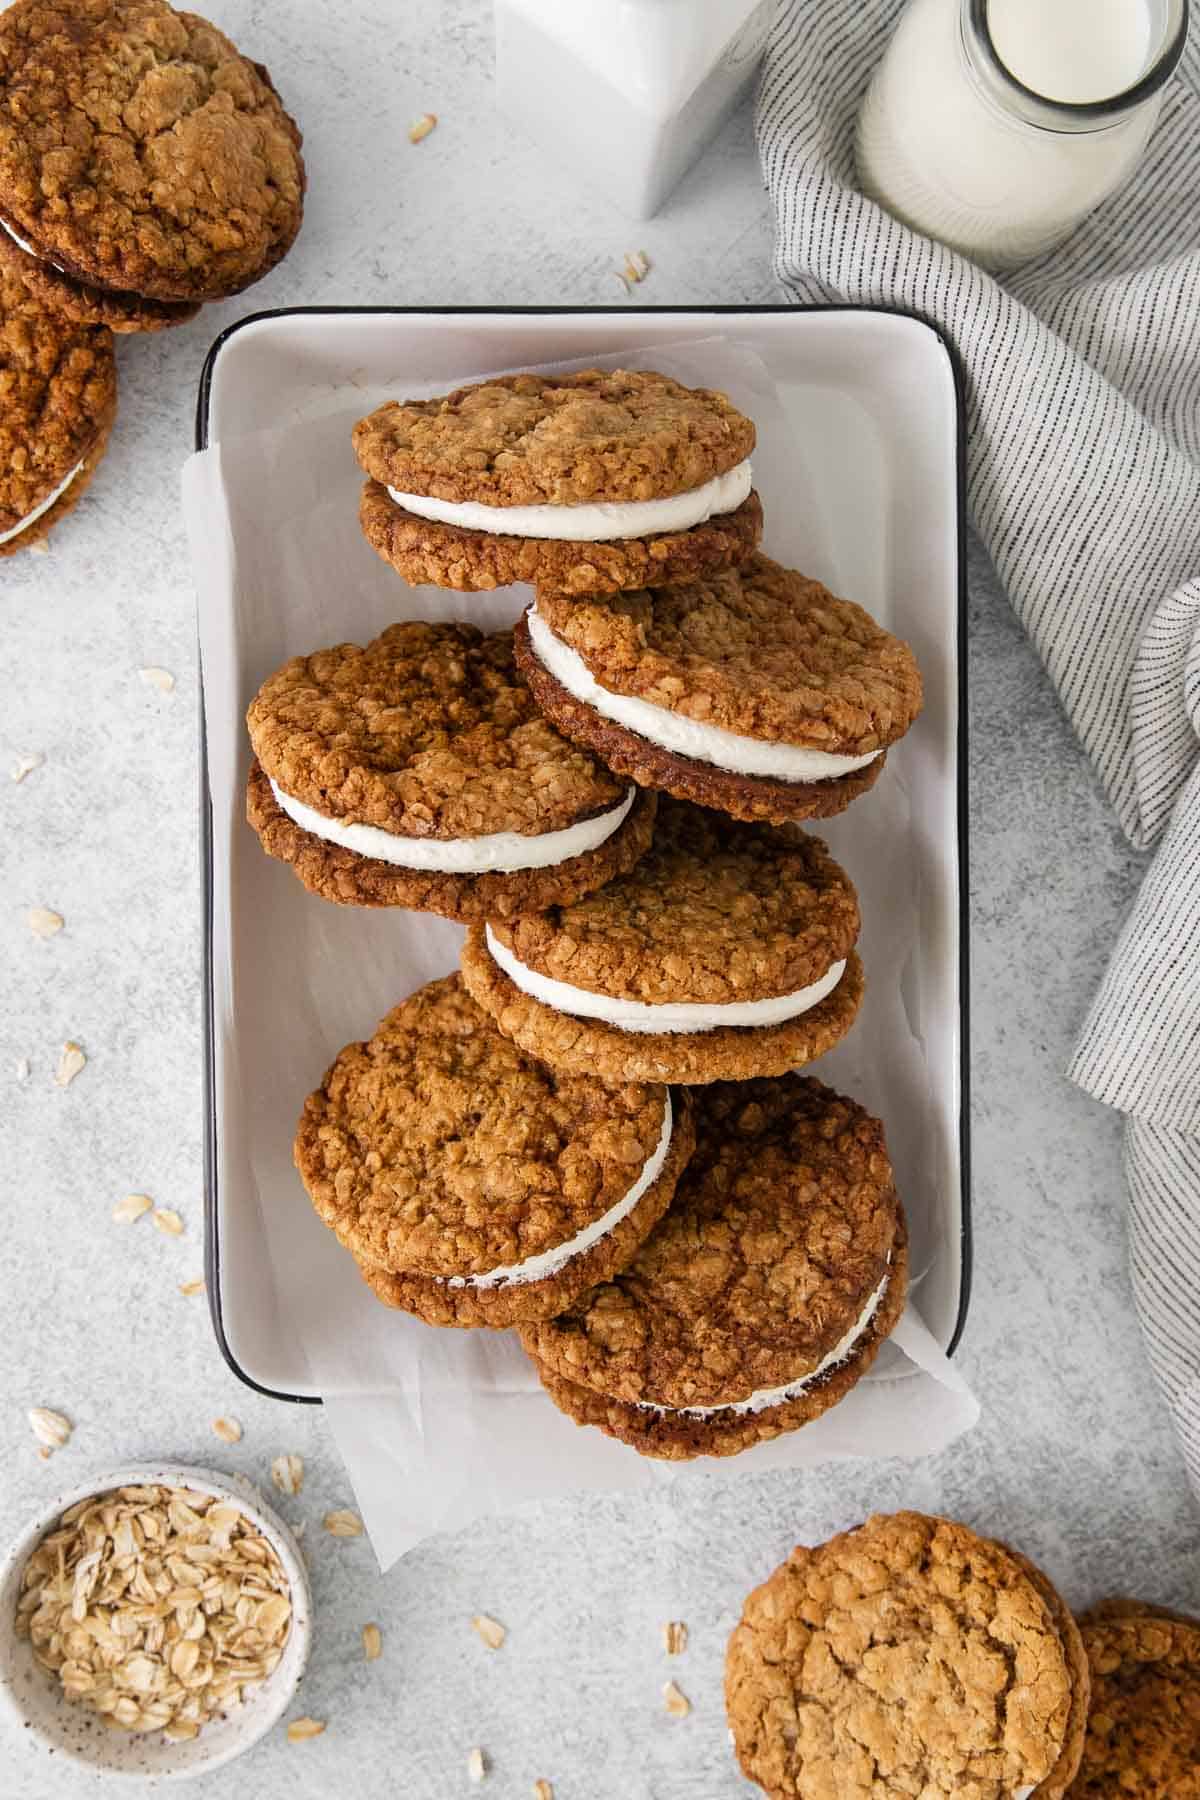 Gluten-free oatmeal cream pies in a baking dish with parchment paper